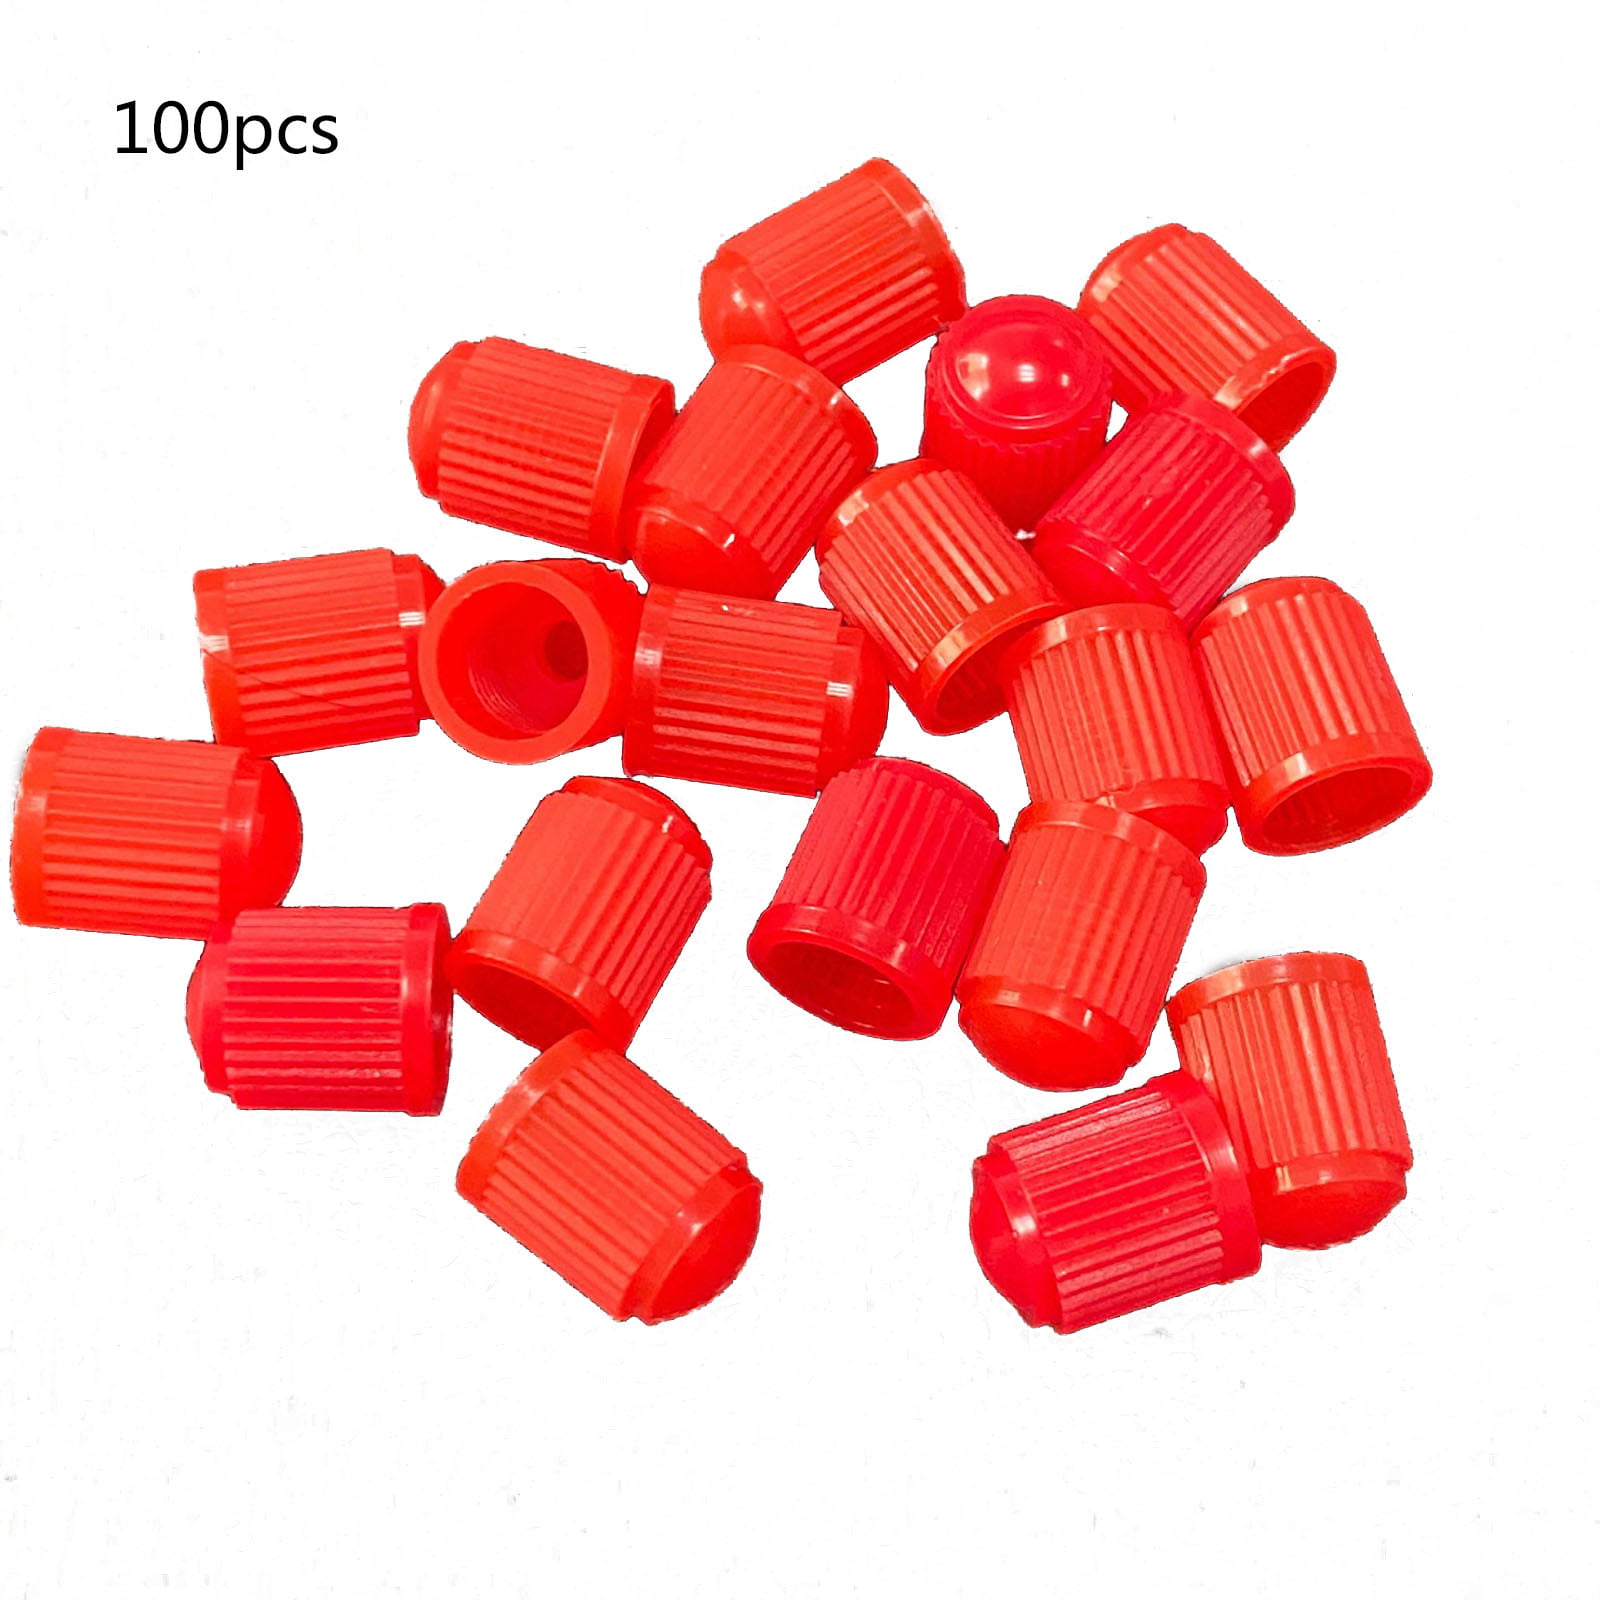 100pcs Red Plastic Tyre Valve Caps Cover Steel Alloy Wheels Car Bike Fast Free 